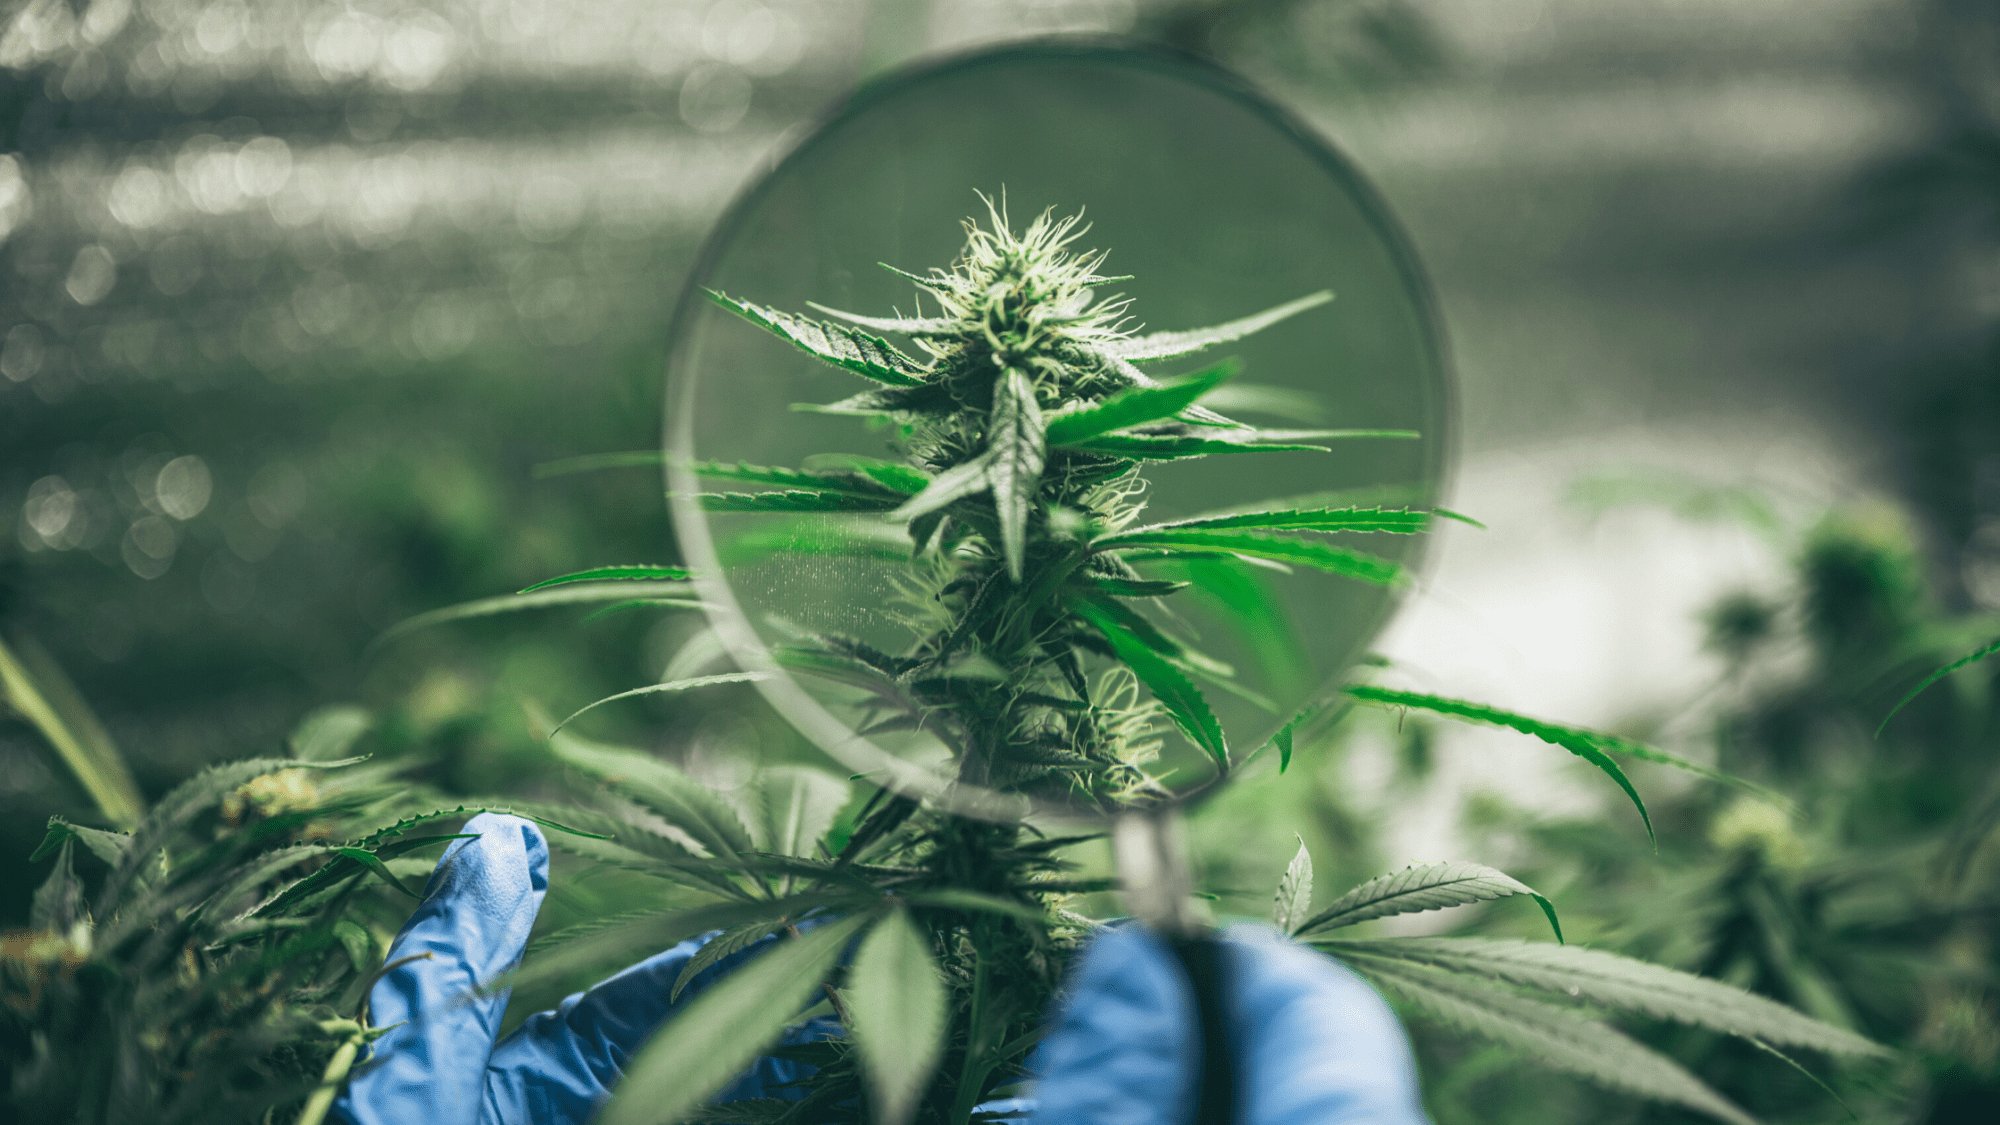 Andrew Wilson, a veteran of the cannabis industry and GrowerIQ's CEO, has recently published an article for Rolling Stone that predicts the future development of the cannabis industry in 2023.